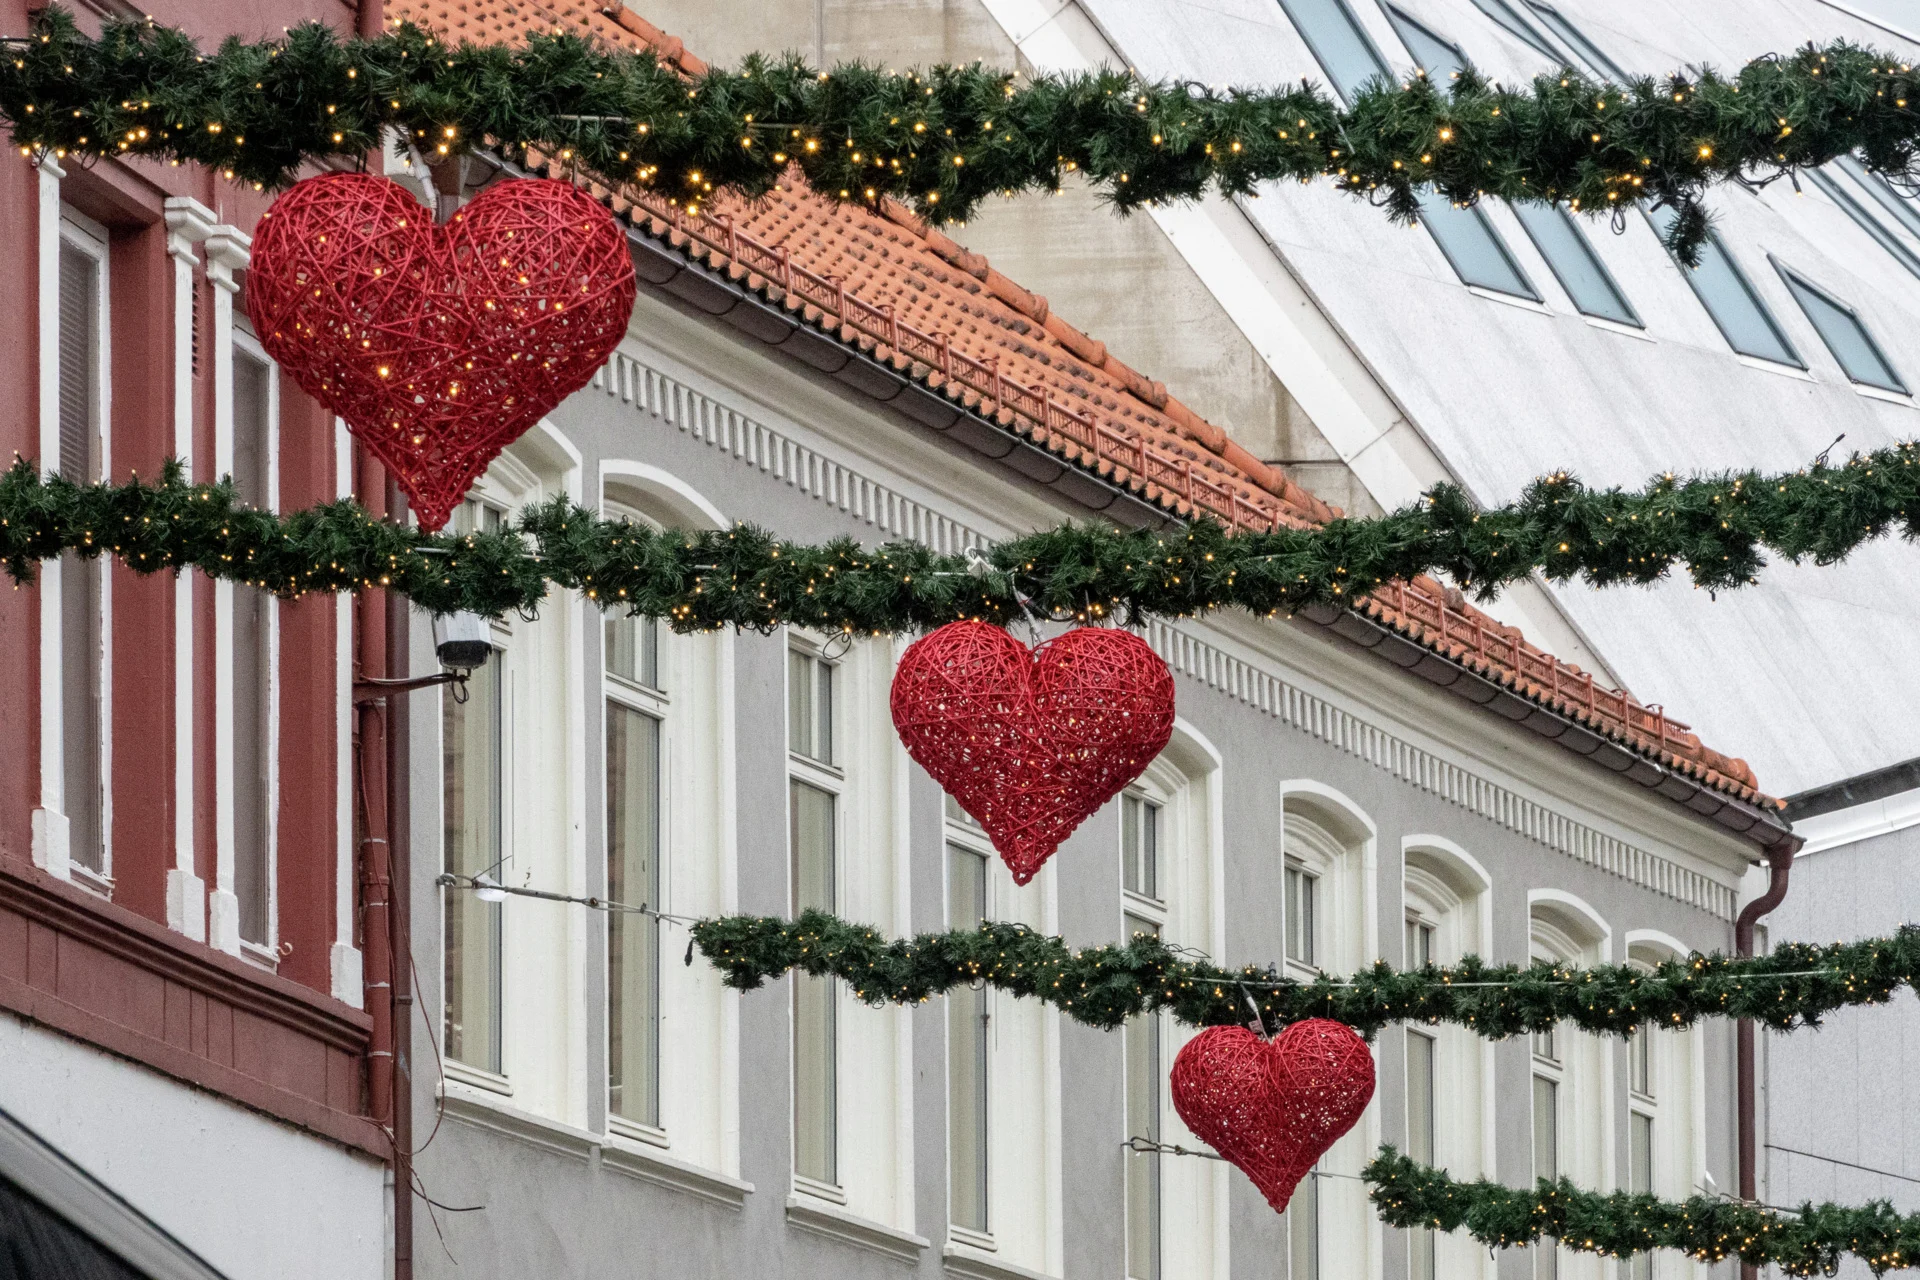 A Christmas garland hangs on the streets of Stavanger